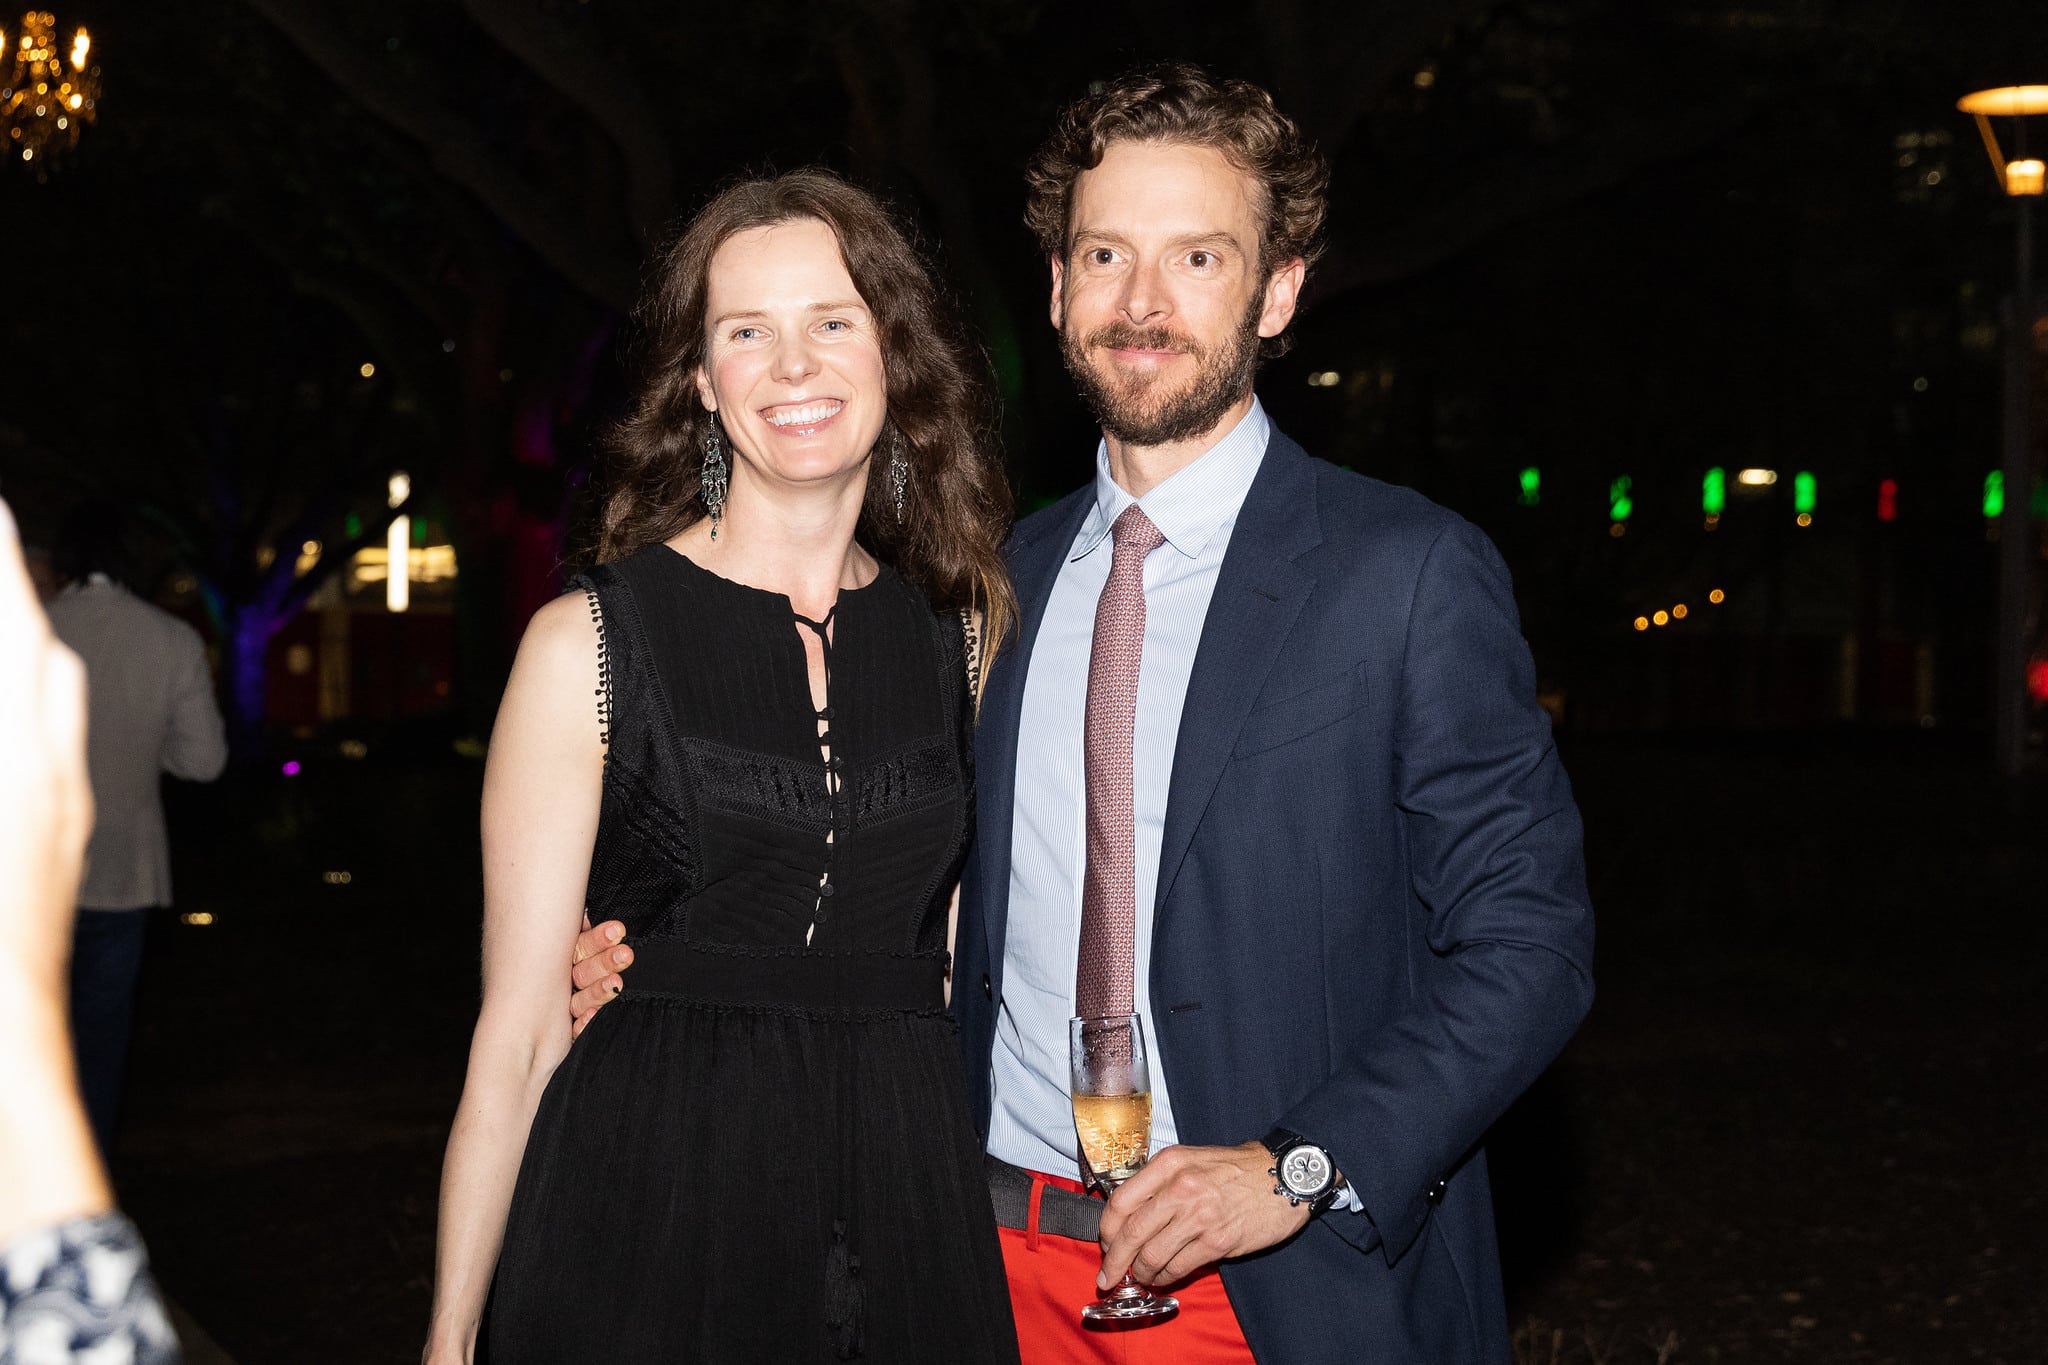 From L-R: Ana Buckman, Andrew Abendshein  Gala on the Green® at Discovery Green in downtown Houston. February 23, 2023. Photo: Lawrence Elizabeth Knox